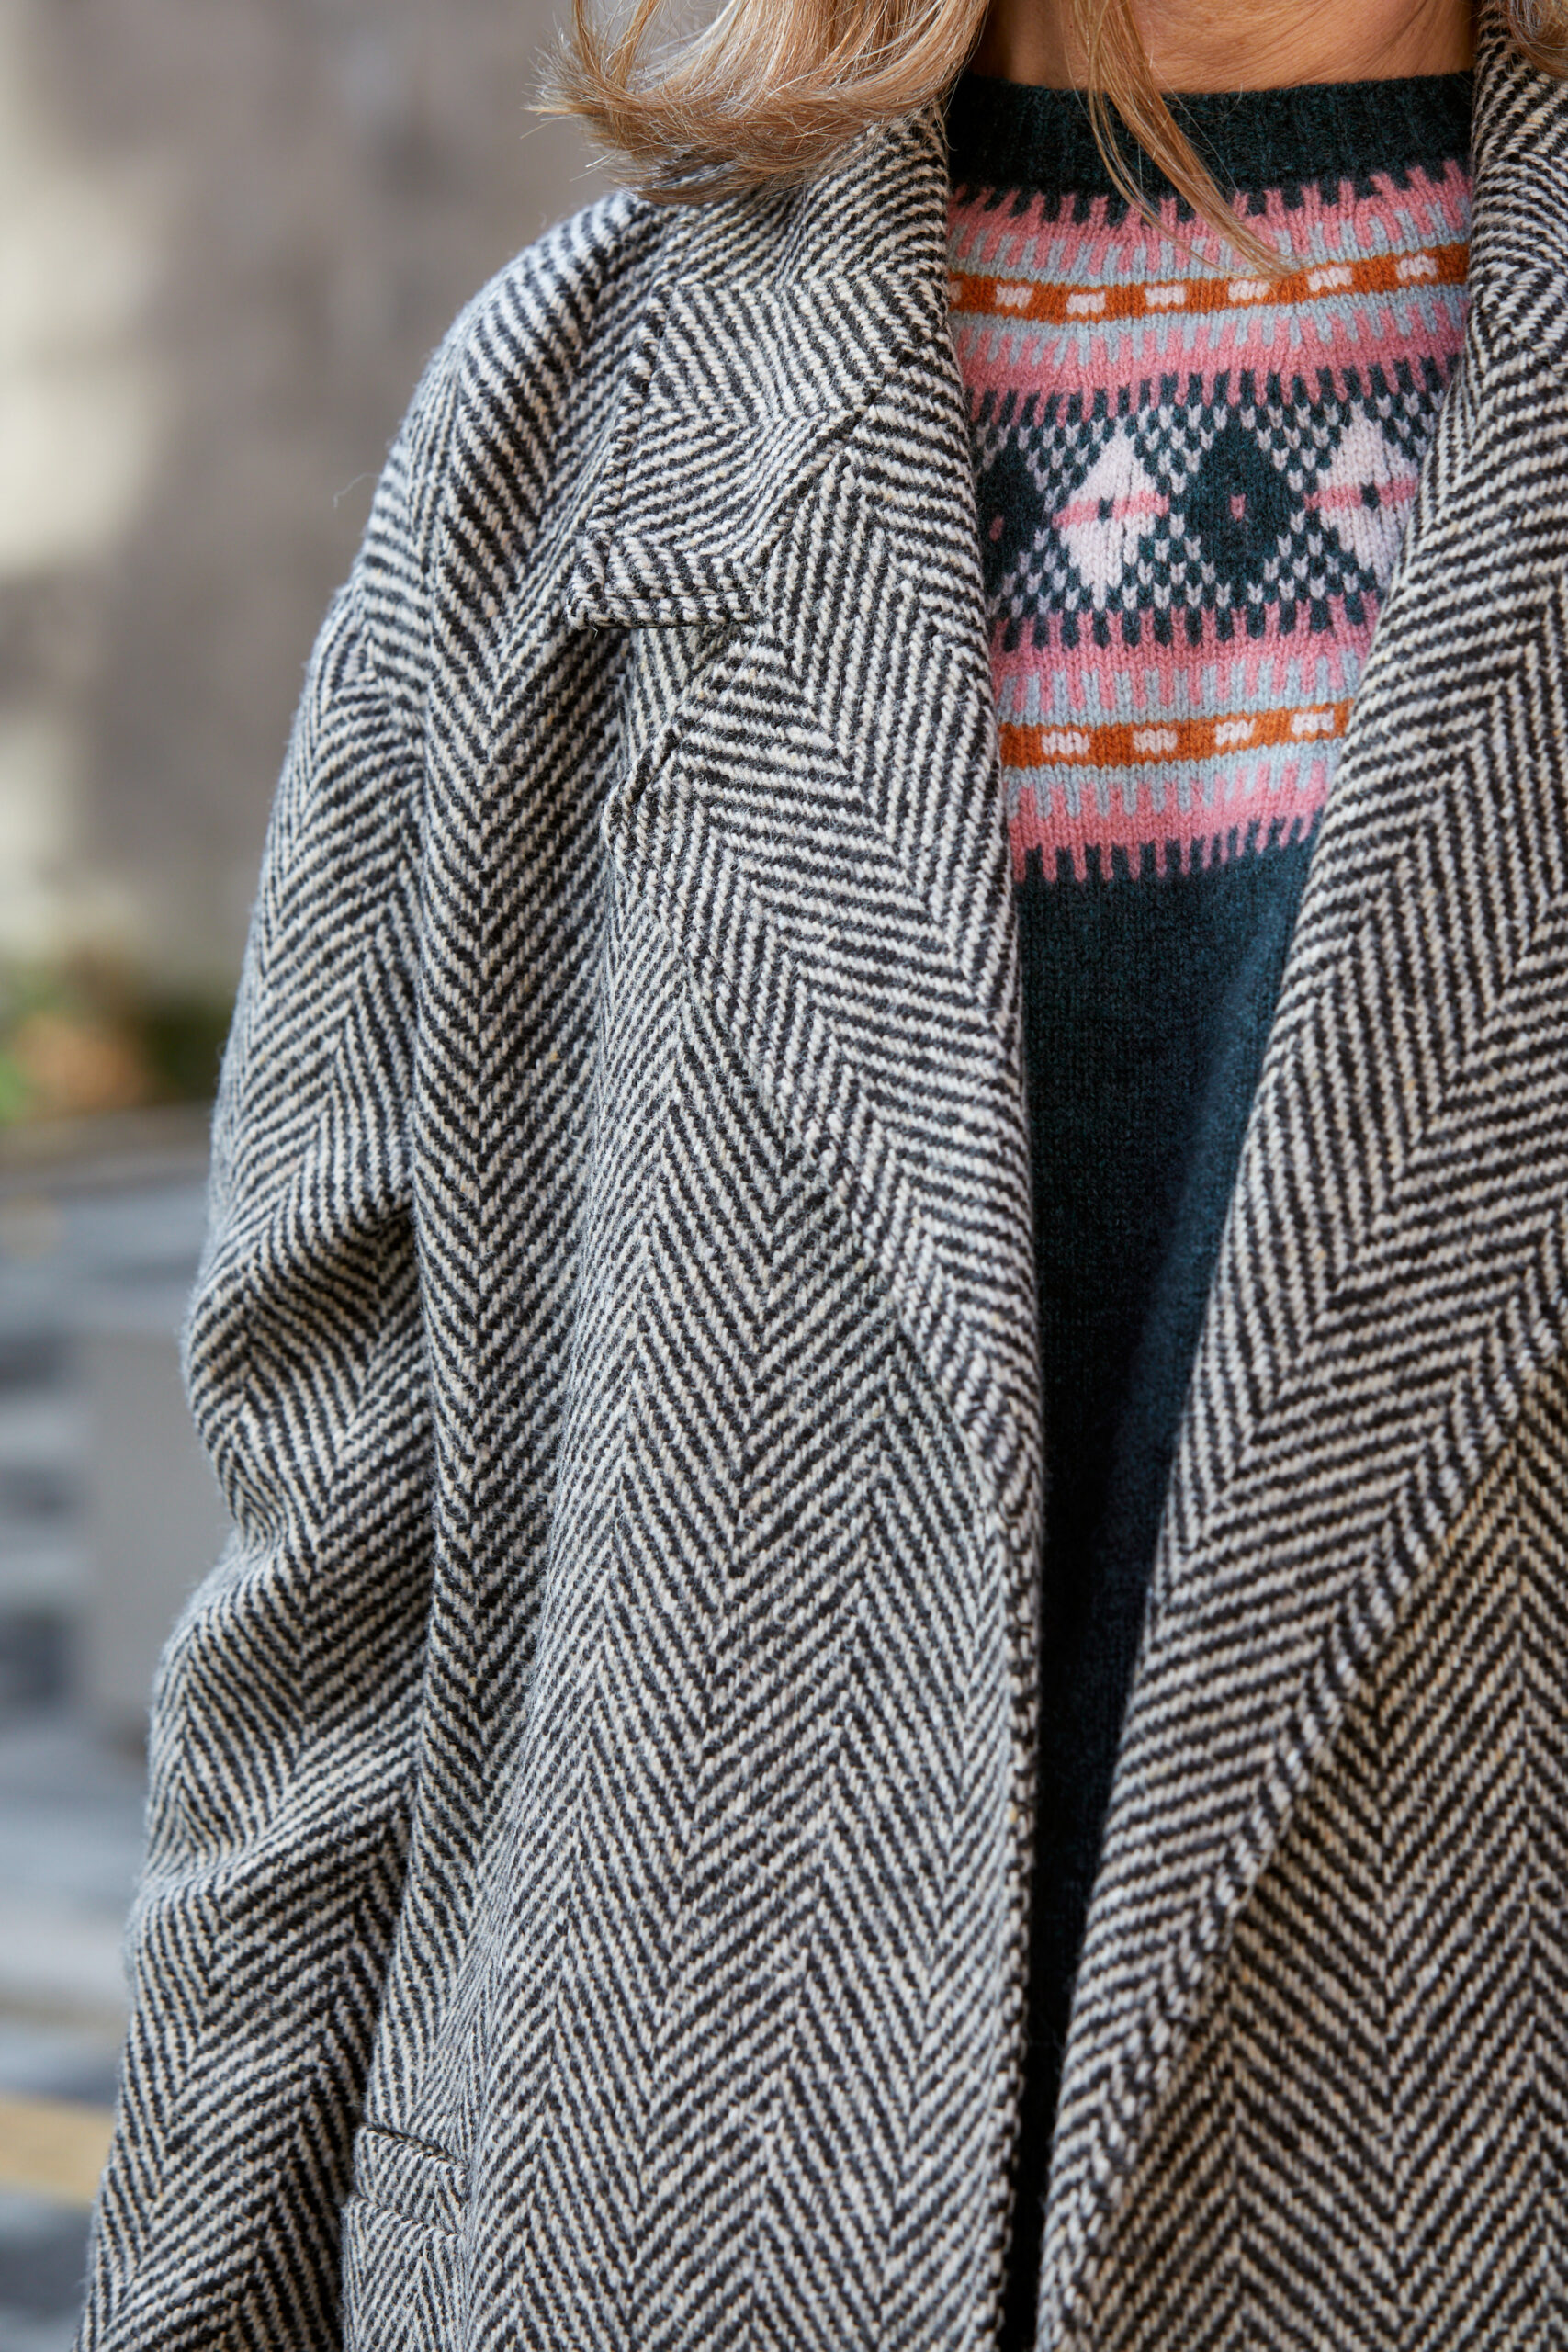 Chic at Every Age, How to Wear a Tweed Jacket